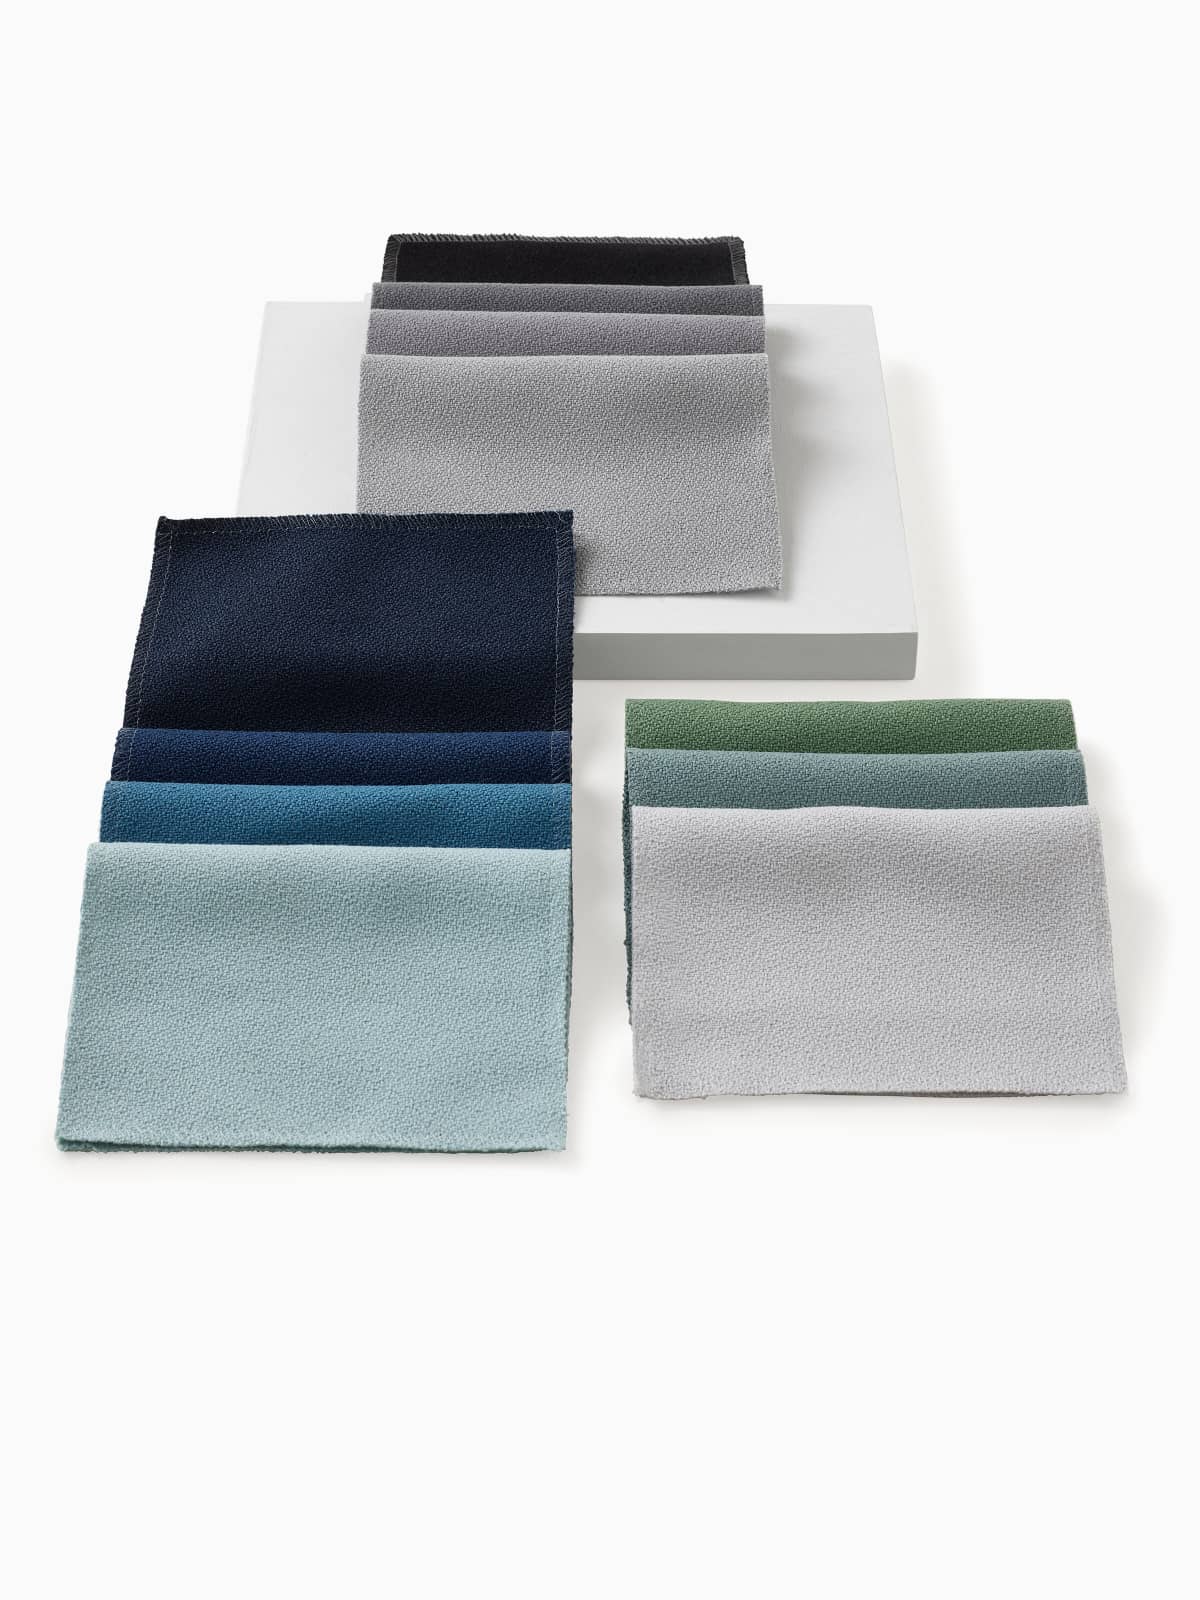 Revenio Collection material with Ocean-bound Plastic, includes Scatter, Mellow, Crepe